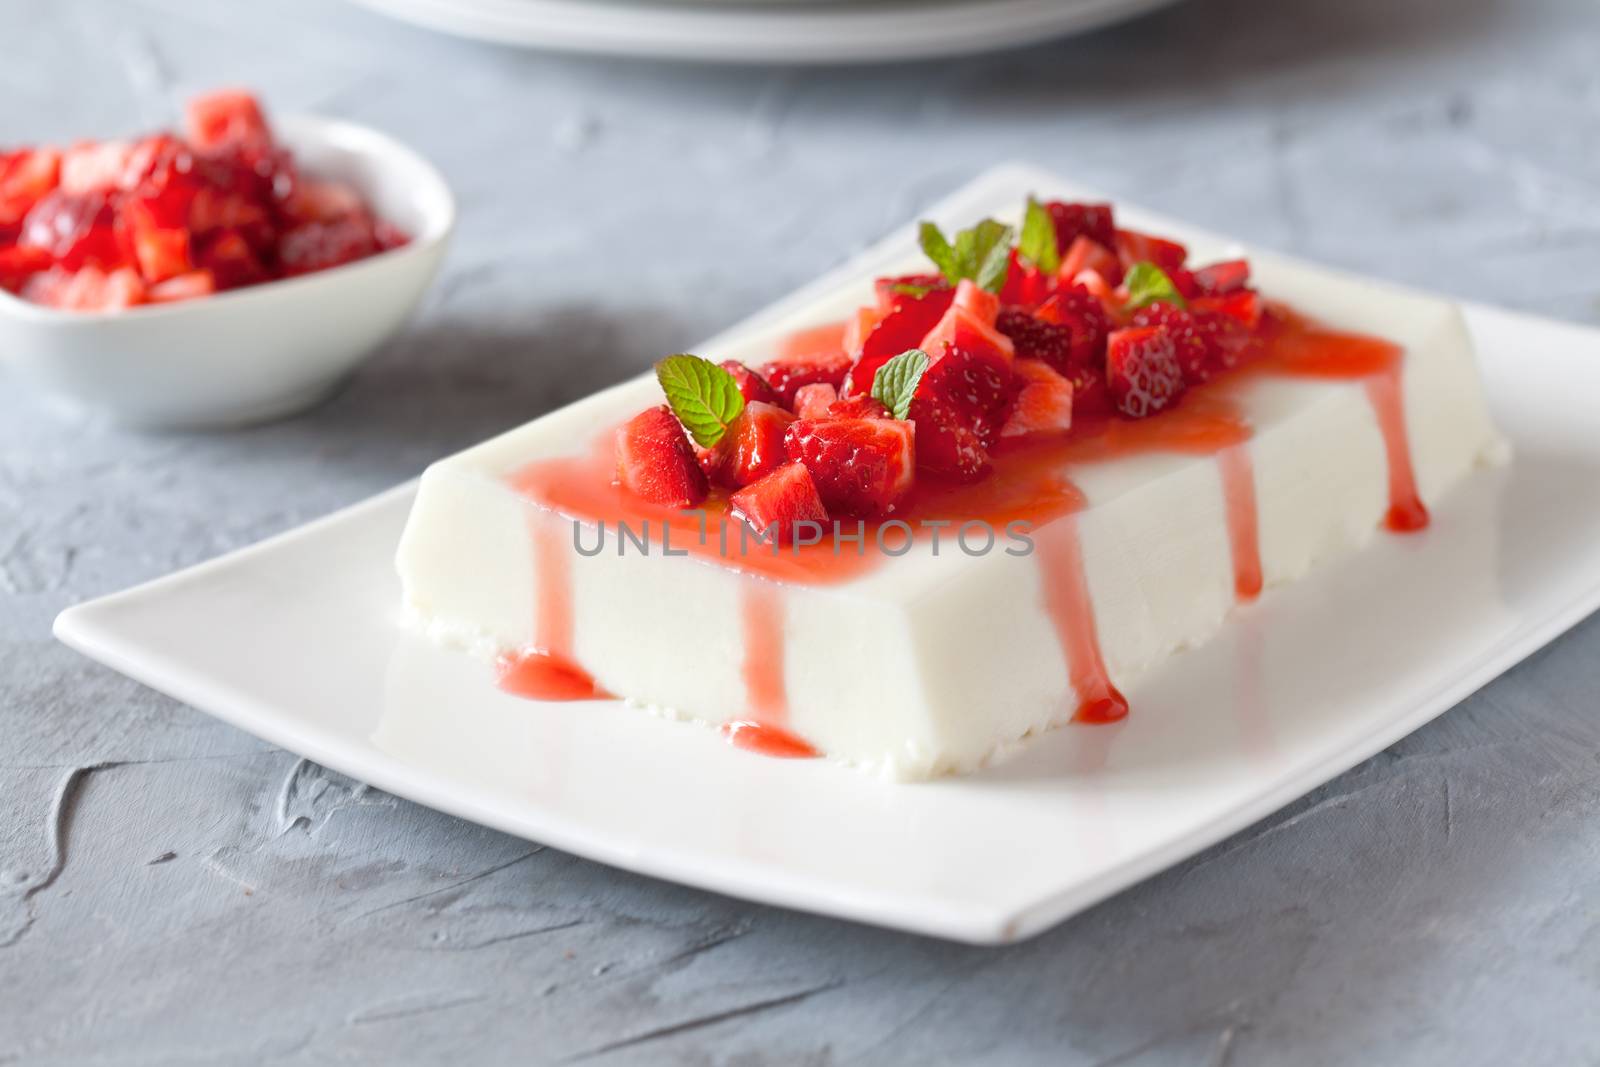 Homemade Panna Cotta With Strawberries by mpessaris